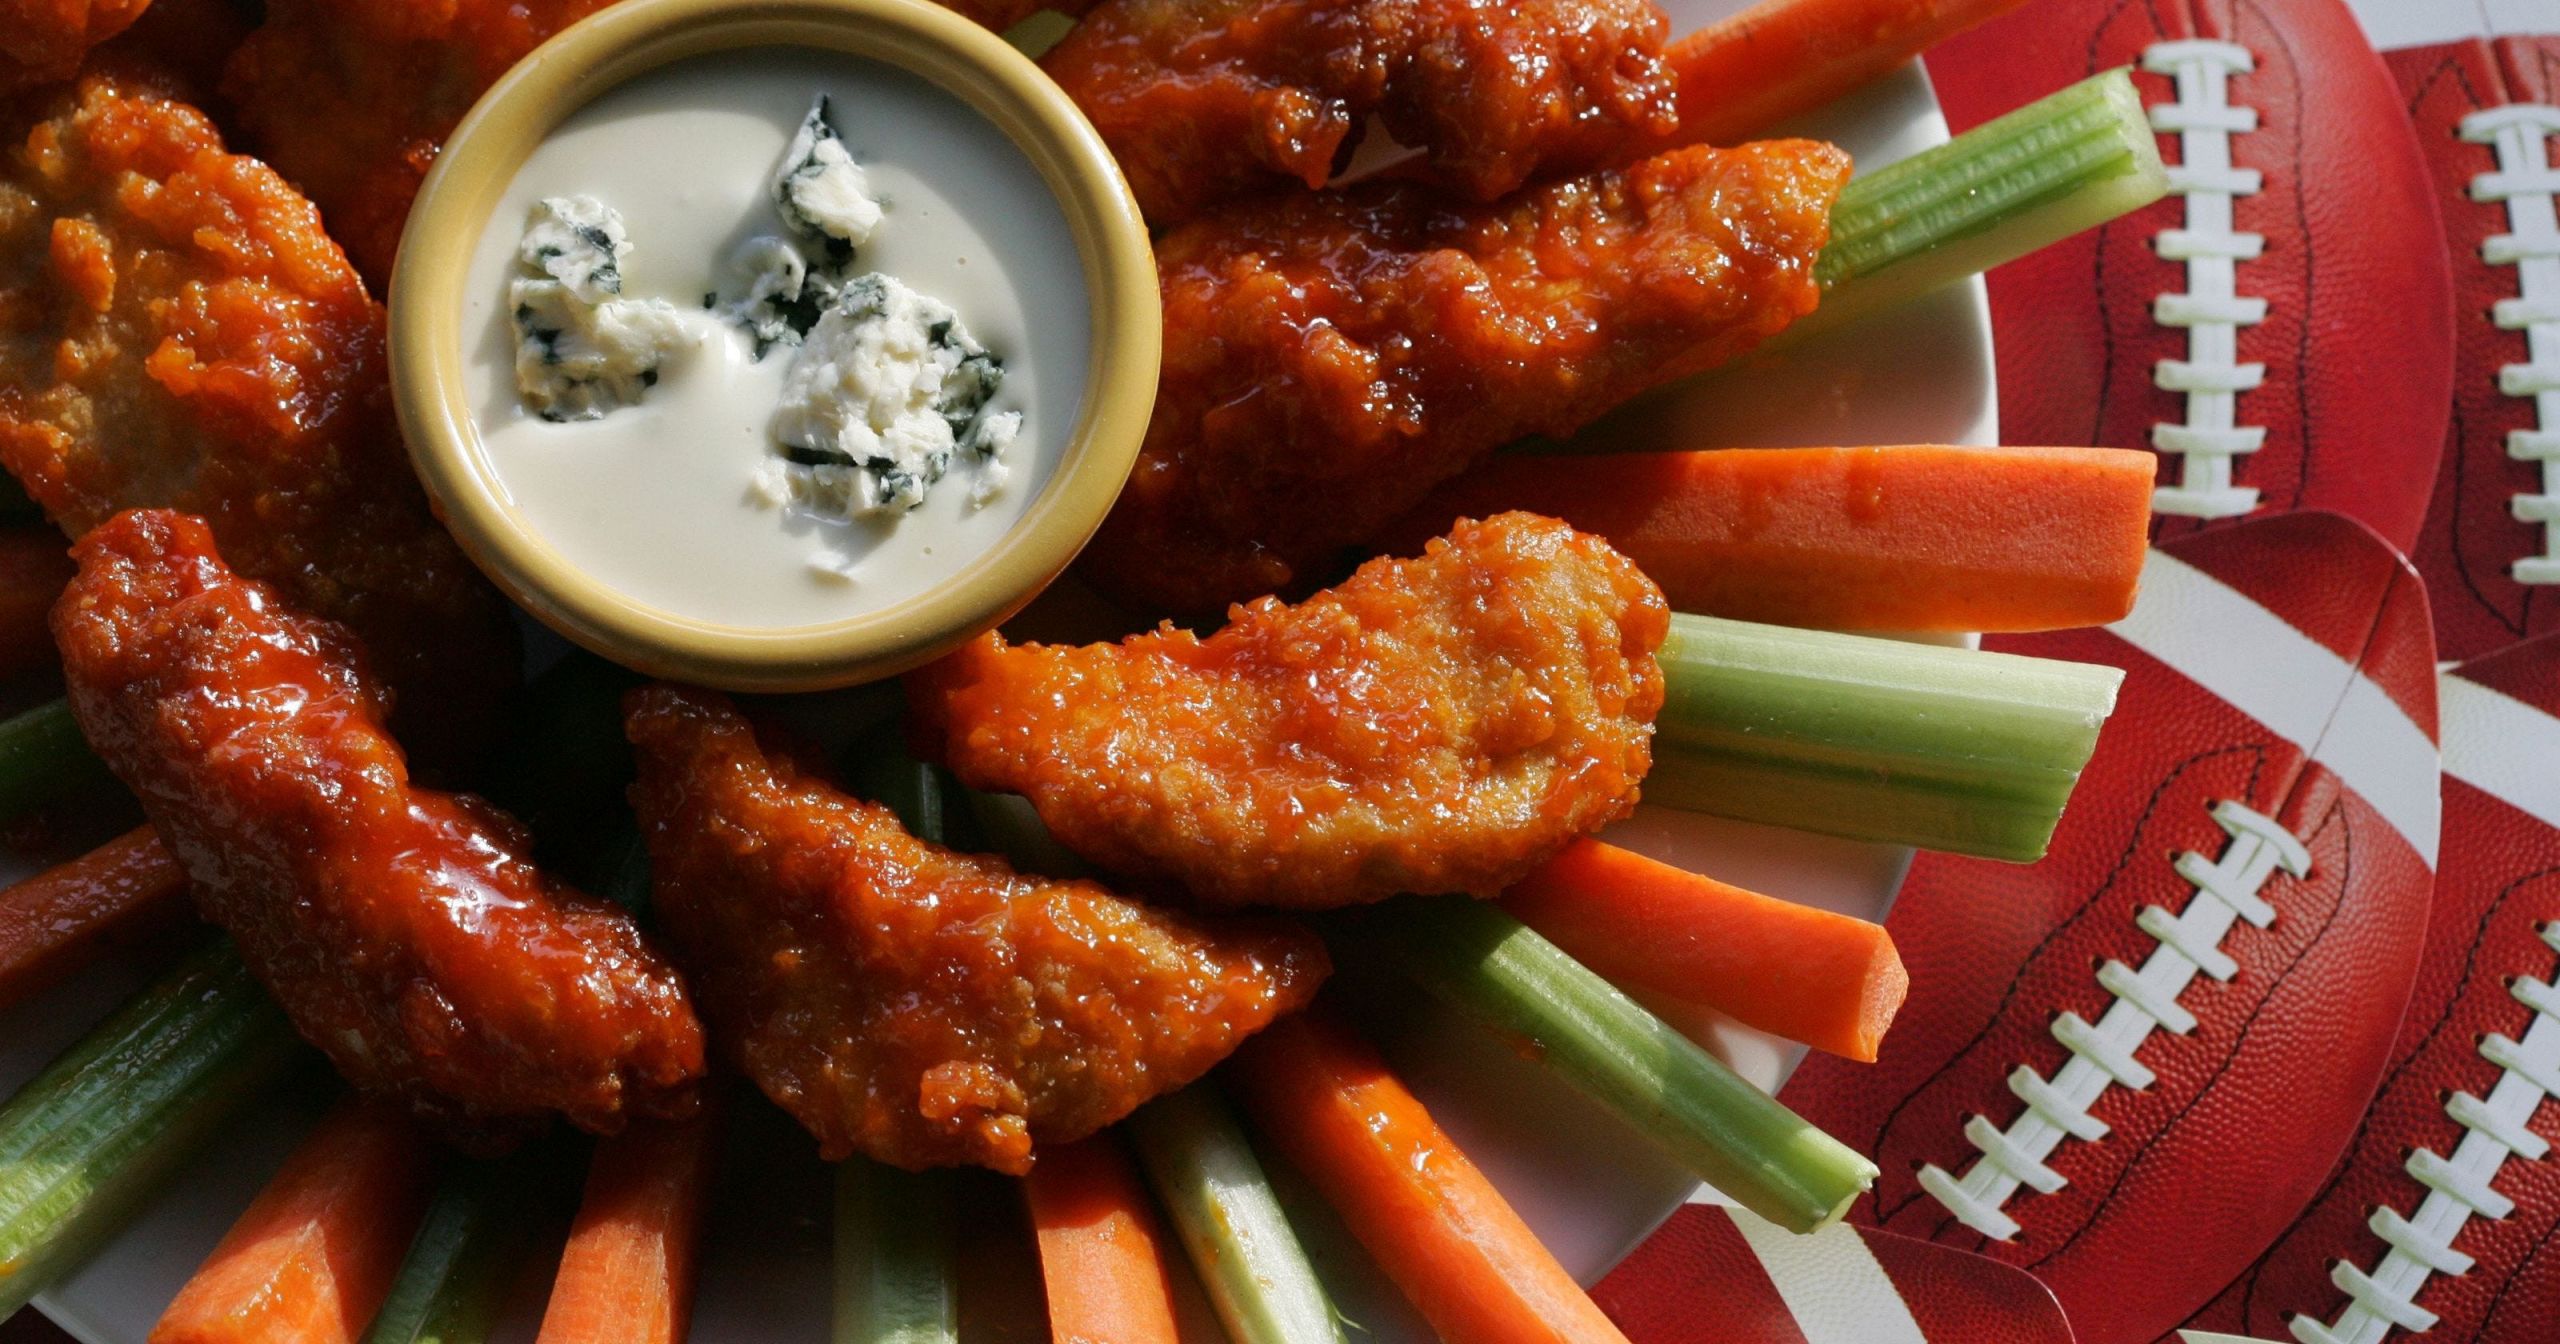 Super Bowl Chicken Wing Recipes
 3 chicken wing recipes your Super Bowl guests will love